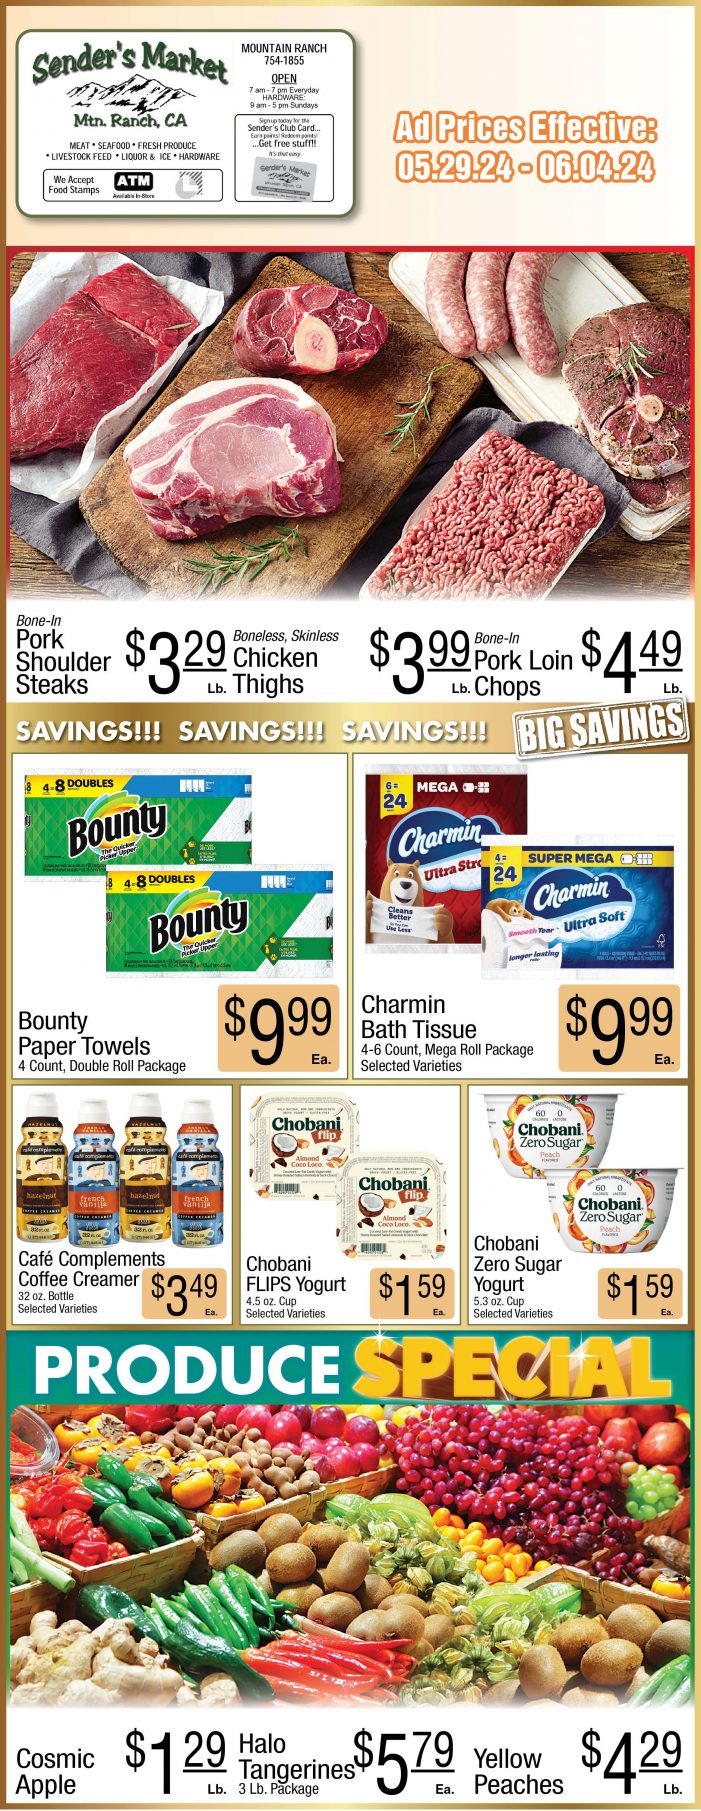 Sender’s Market Weekly Ad & Grocery Specials Through June 4th! Shop Local & Save!!